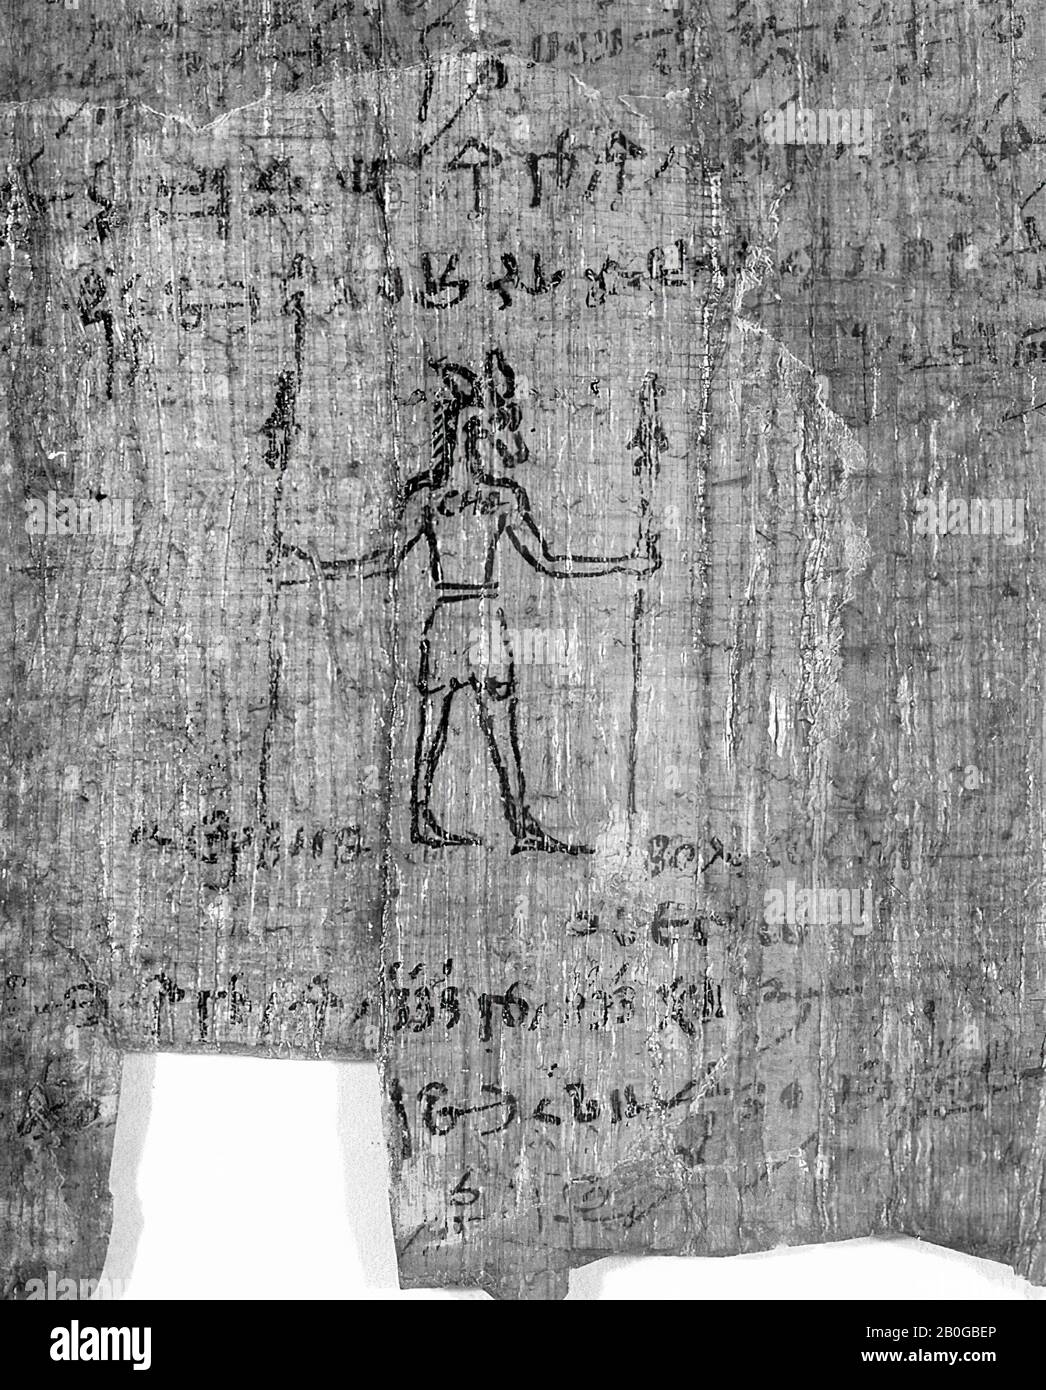 papyrus, demotic, sun eye, magical, I 384 A = sheet 1, Free damaged handwriting, A) Method of framing: stuck paper végétal, behind double glazing, Sizes :, Glass frame: 29 x 50 cm, Handwriting: 23 x 48.5 cm, B) Classification :, 1: number of columns: recto: 4 columns, separated by double line, Verso: 5 columns, 2: type of writing: Demotic (recto) and Greek (verso), 3: ink color: black and red, 4: reading direction: right to left (Demotic) and left to right (Greek), 5: number and place vignettes: recto: none, verso: two vignettes, Recto :, In column III between lines 13 and 24 there is an empty Stock Photo